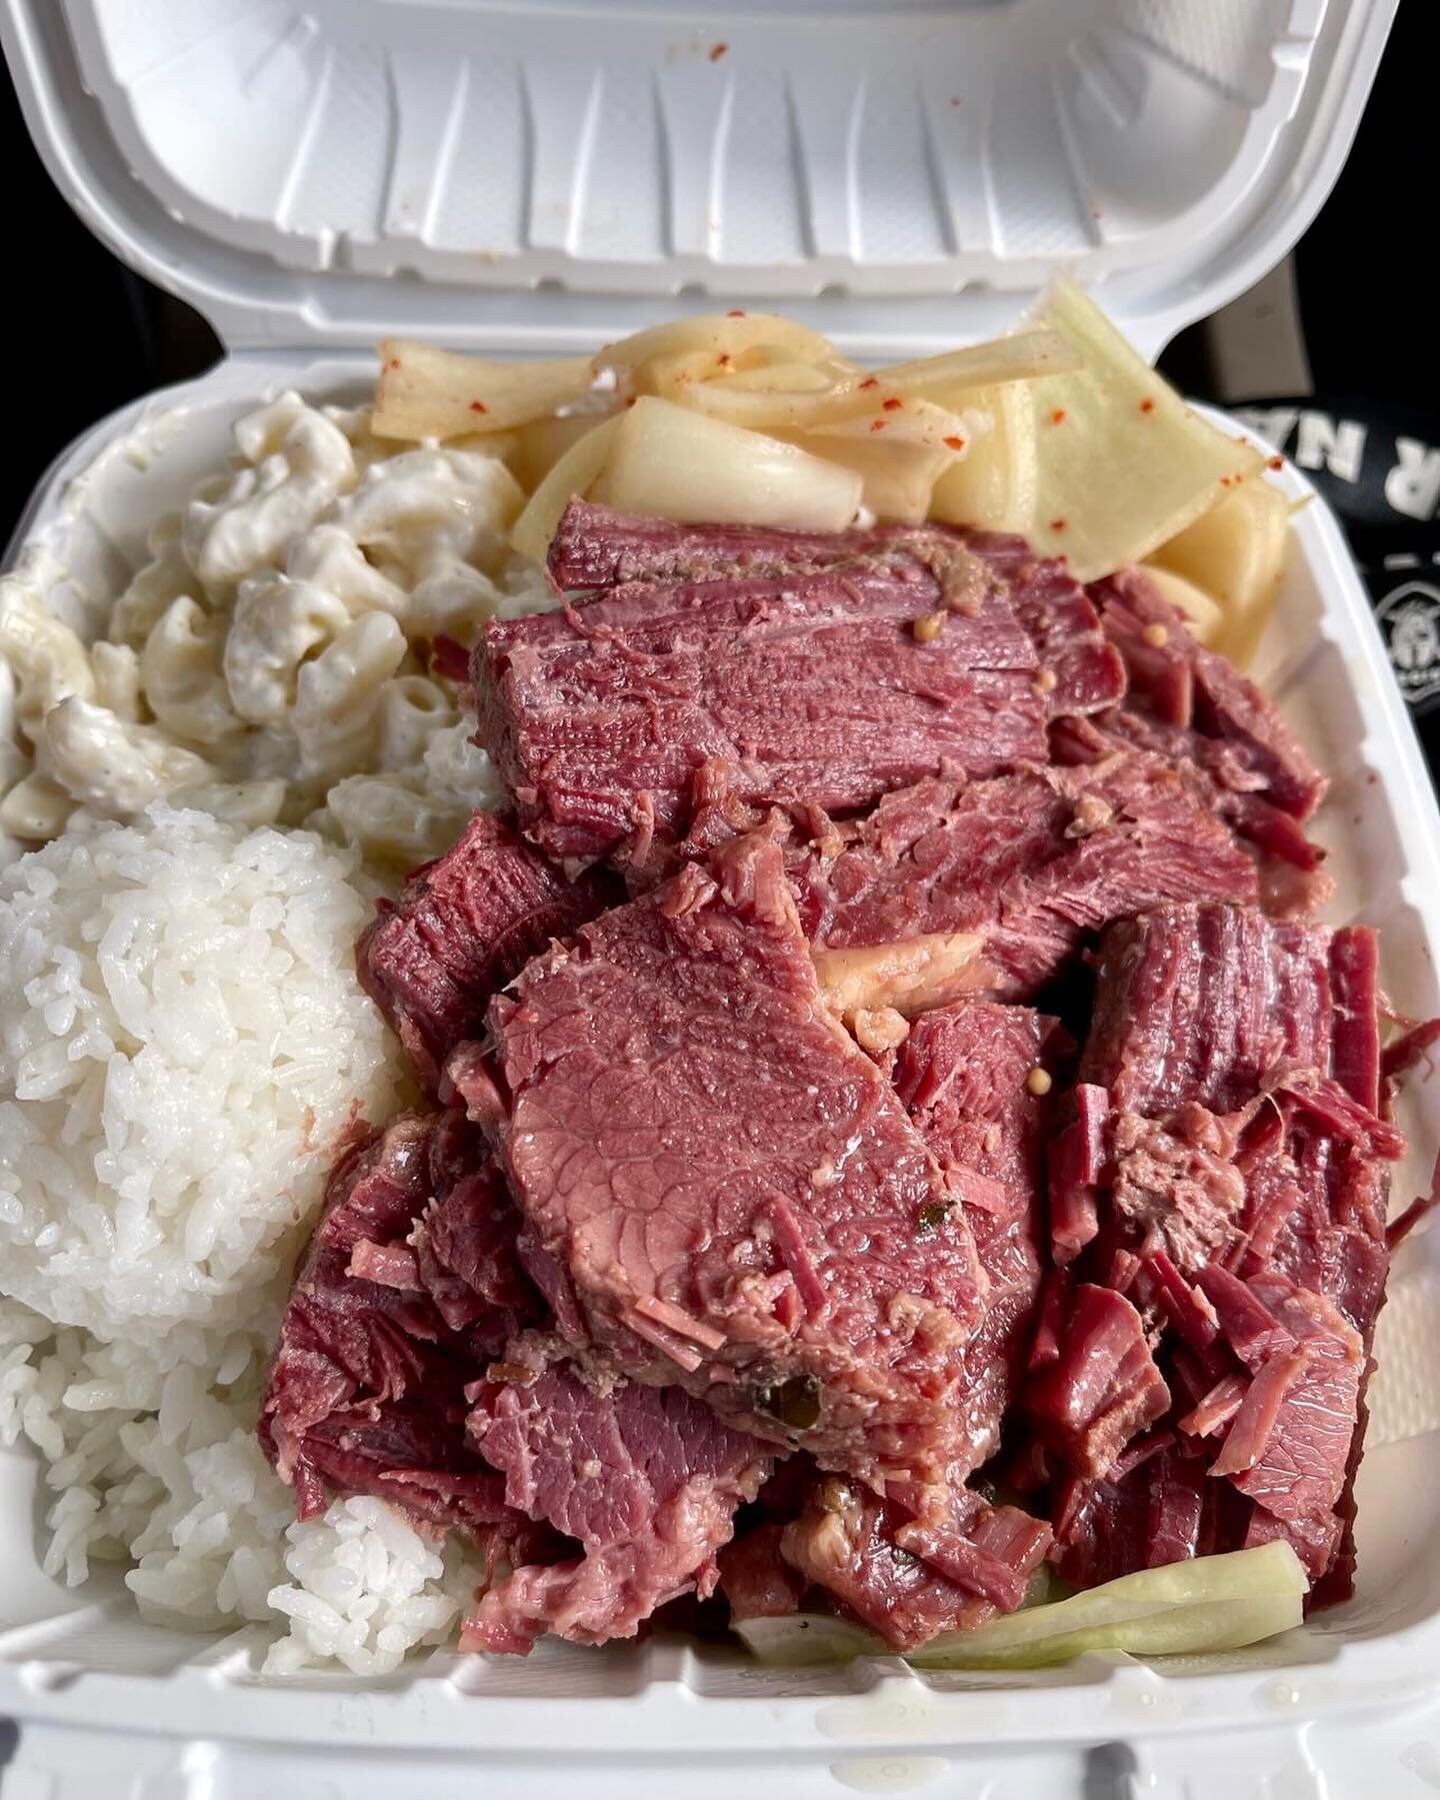 FEATURED TODAY- Our Fresh Corned Beef and Cabbage as captured by @23tommygunn 🙌🏽

Available every Tuesday and Saturday, it&rsquo;s St. Paddy&rsquo;s Day year round here! Come visit us to get yours today. Available in both regular and also carte por